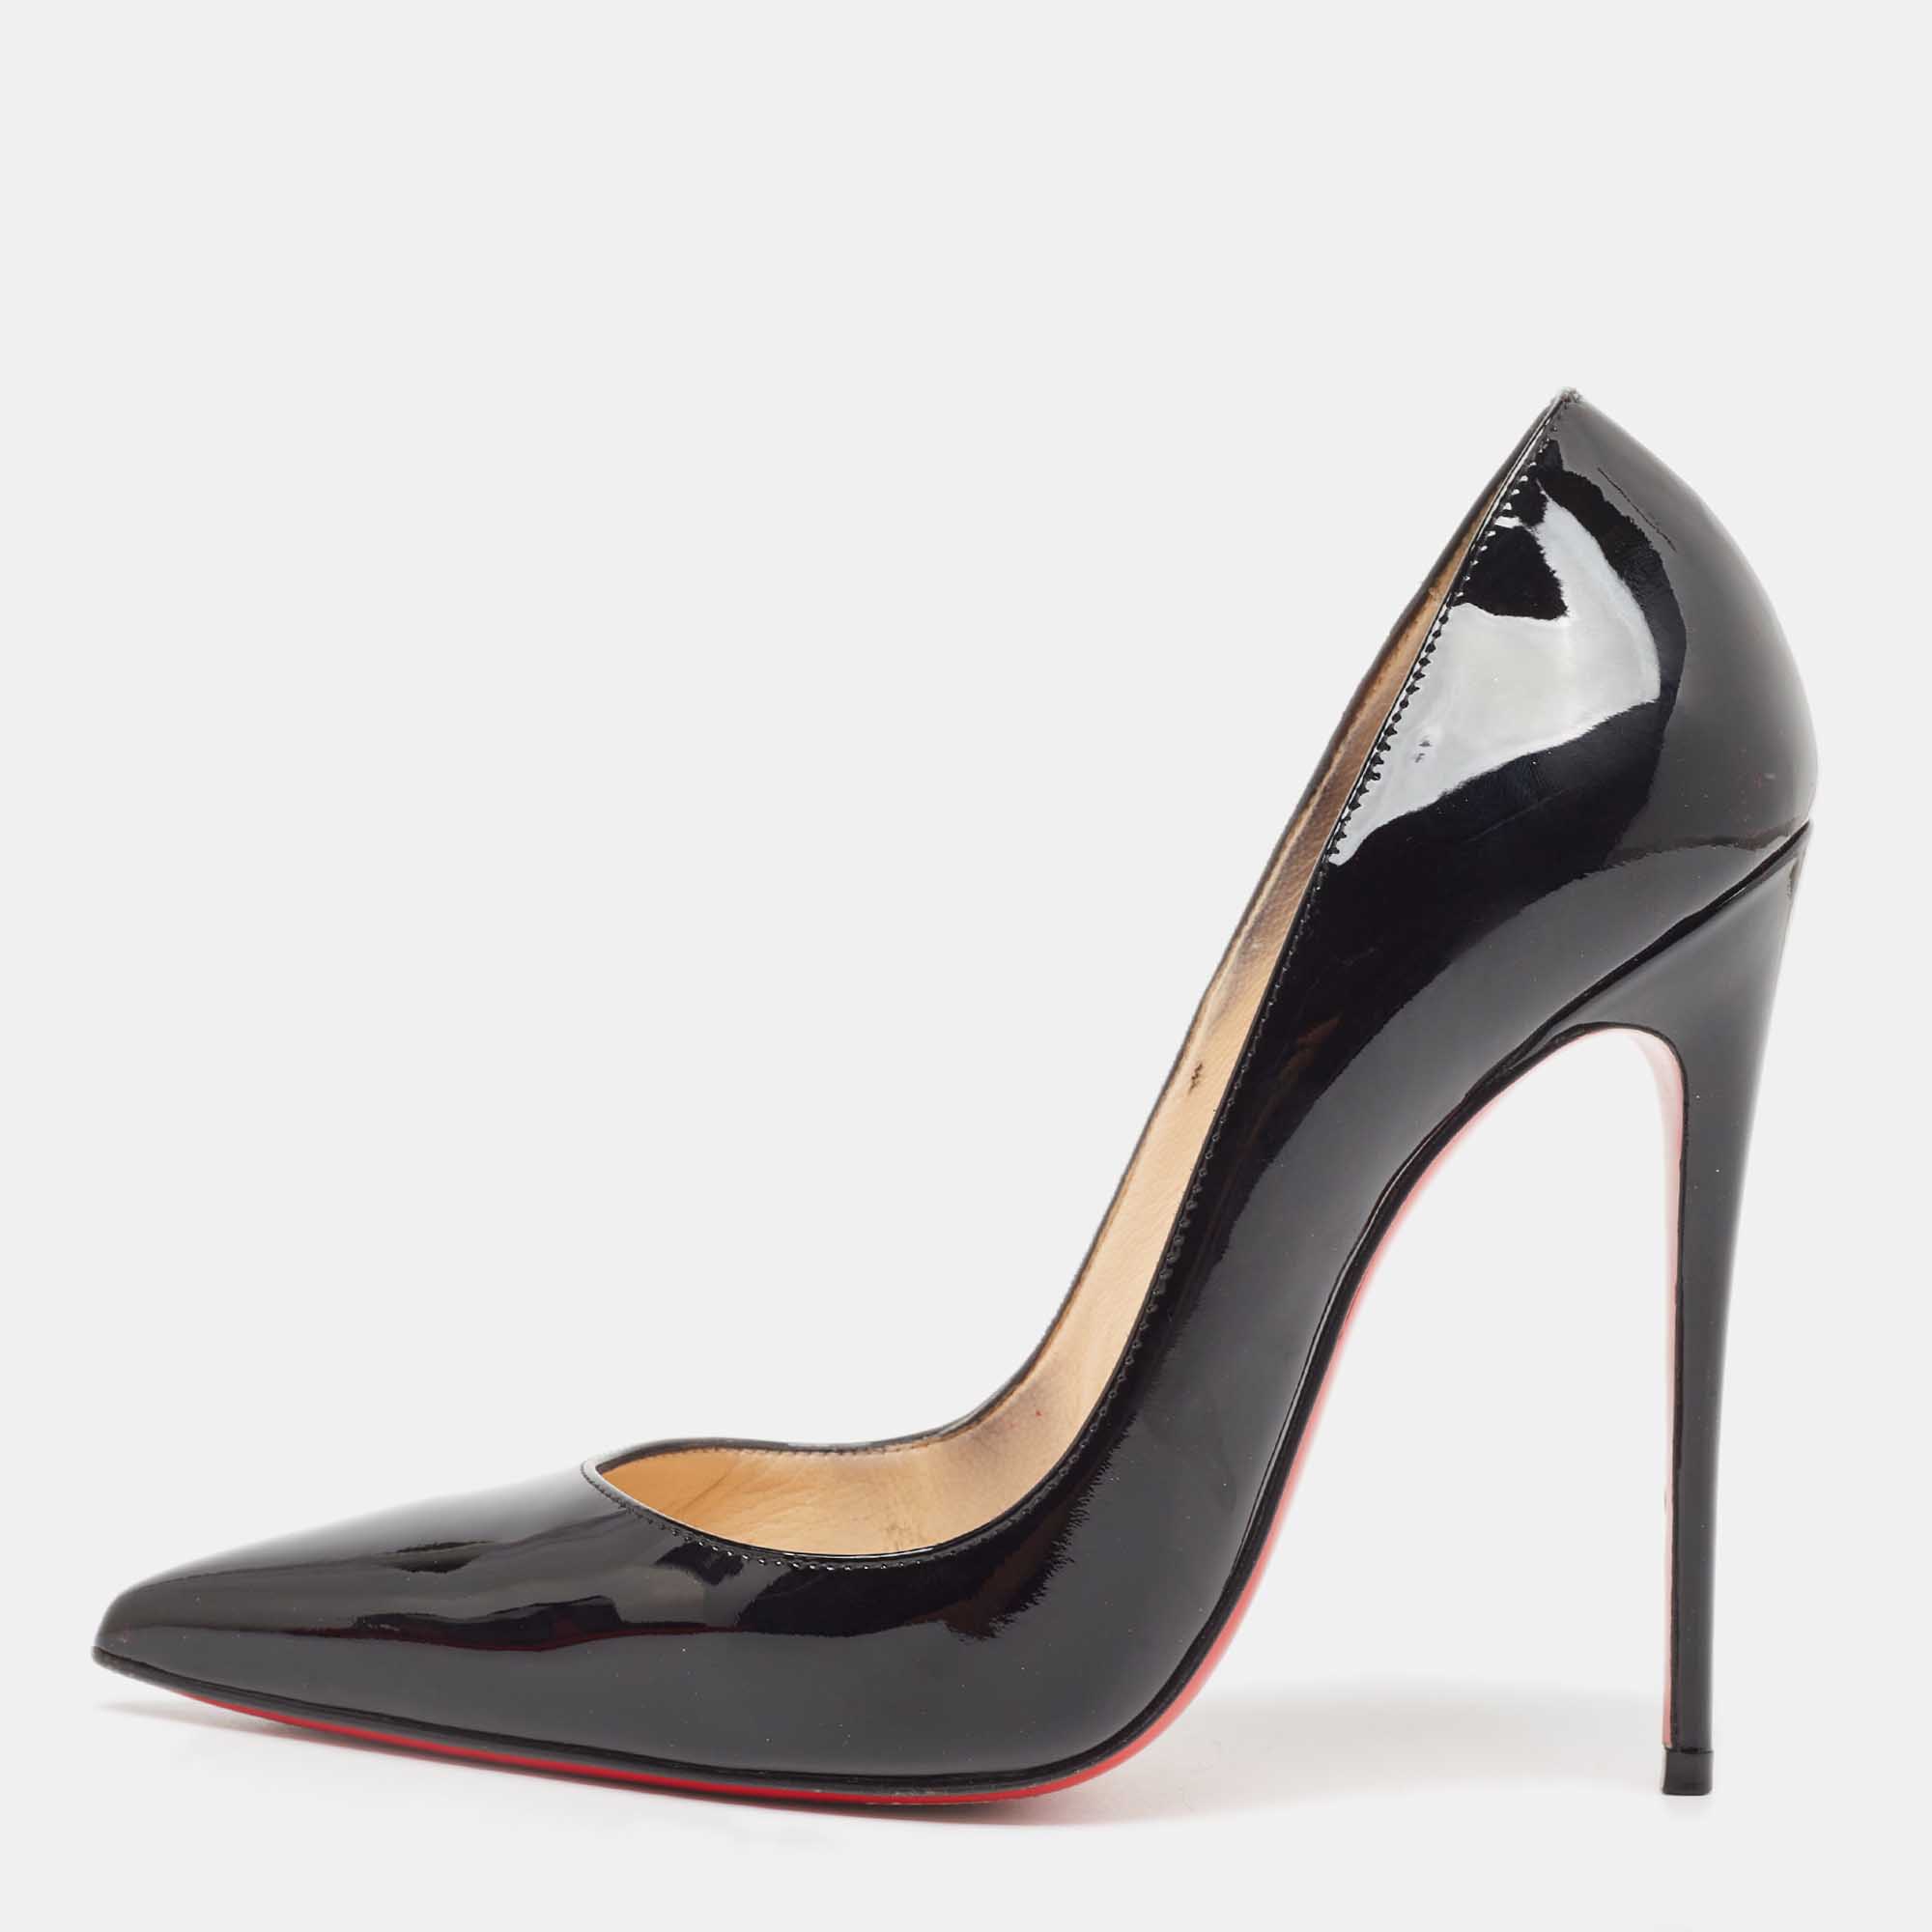 Pre-owned Christian Louboutin Black Patent Leather So Kate Pumps Size 38